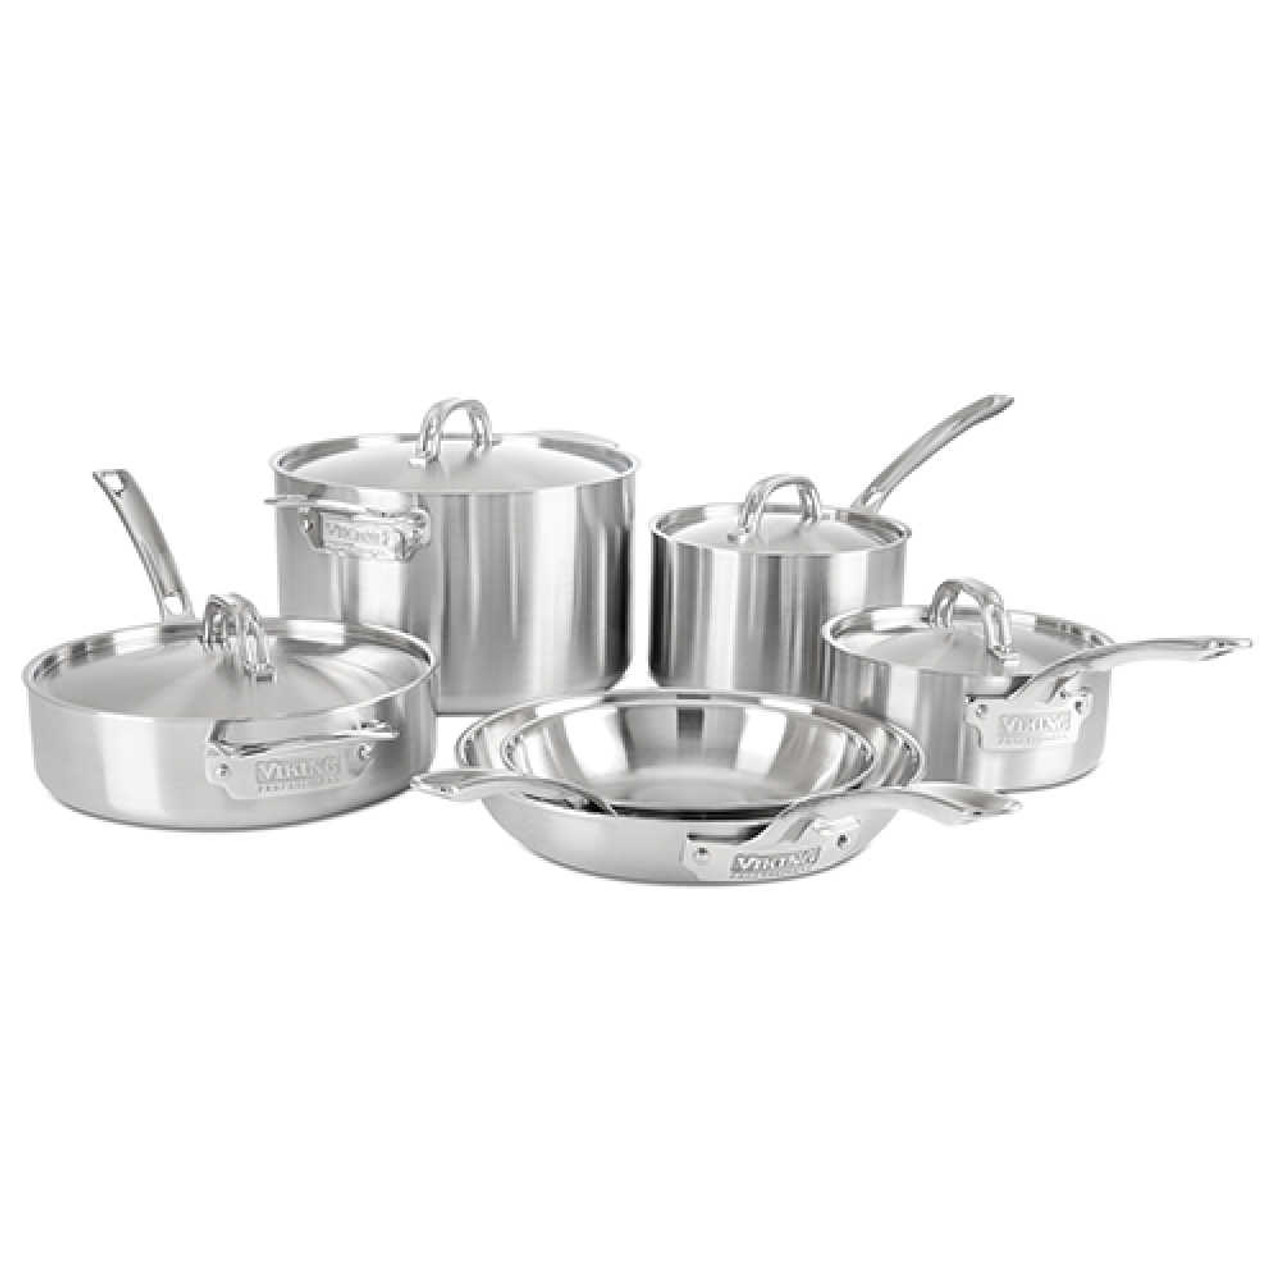 https://cdn11.bigcommerce.com/s-hccytny0od/images/stencil/1280x1280/products/4811/19743/Viking_Professional_5-Ply_10-Piece_Cookware_Set__63052.1656112111.jpg?c=2?imbypass=on